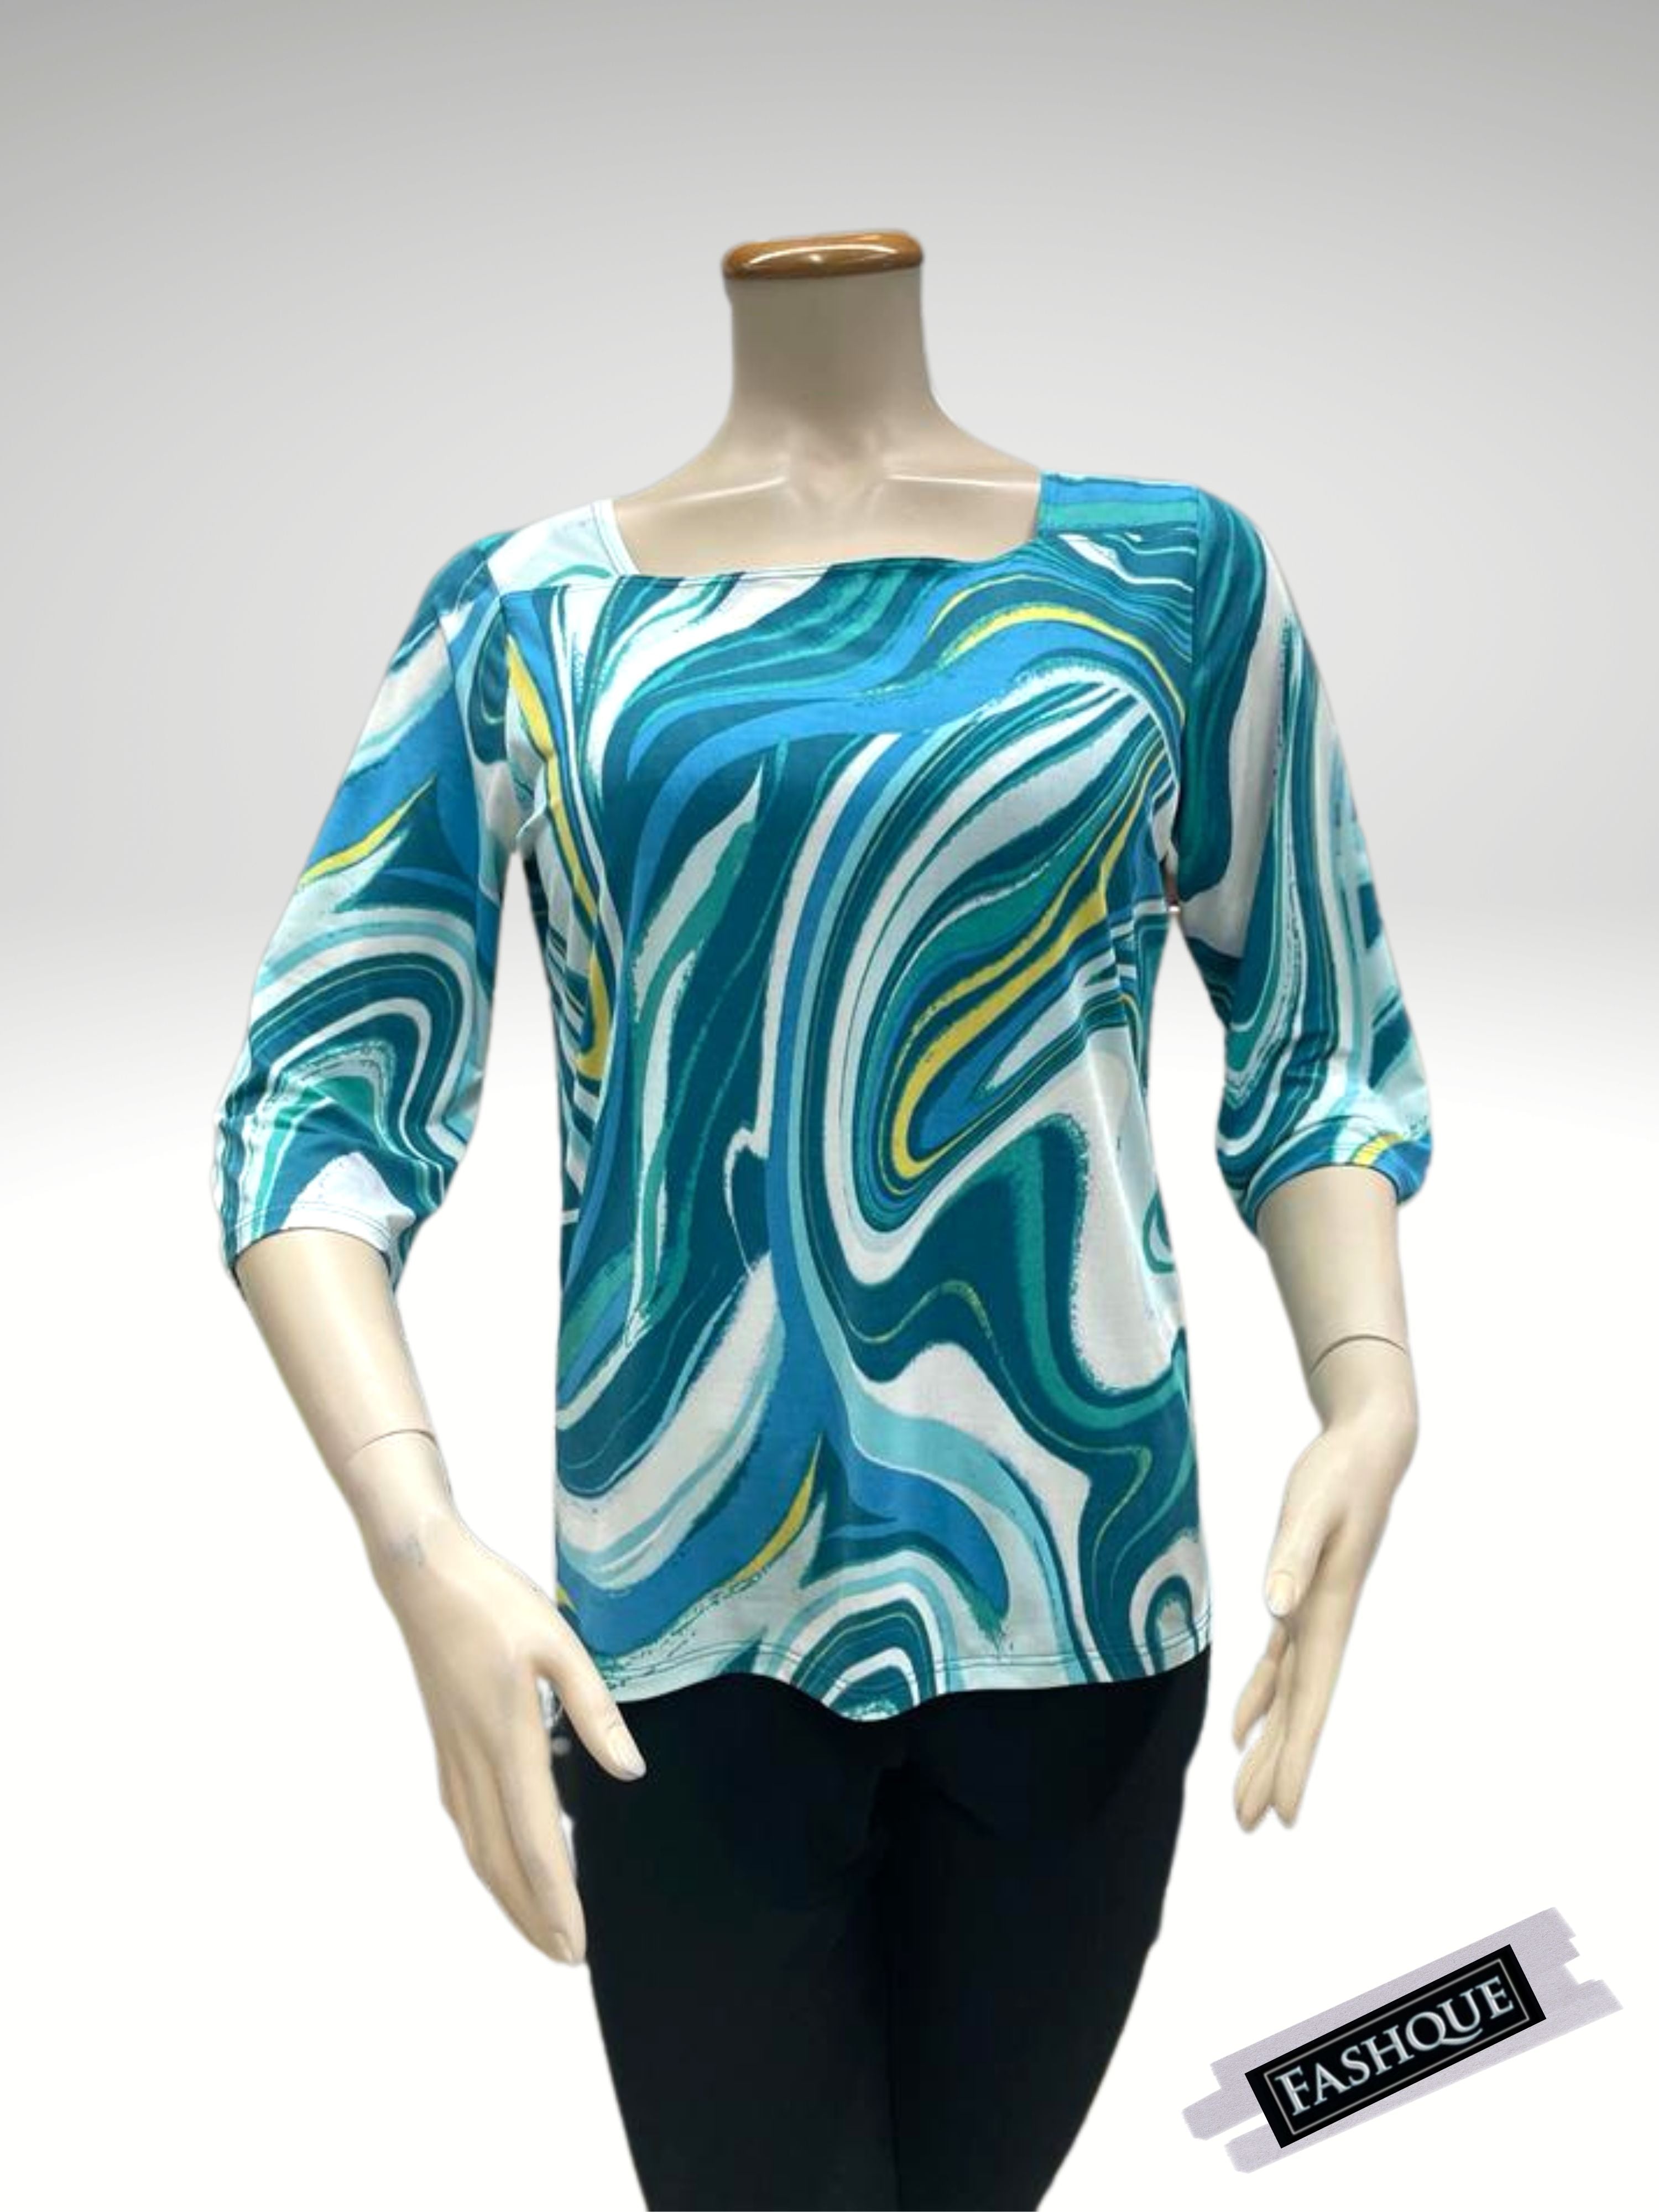 Square Neck 3/4 Sleeve Top - T544